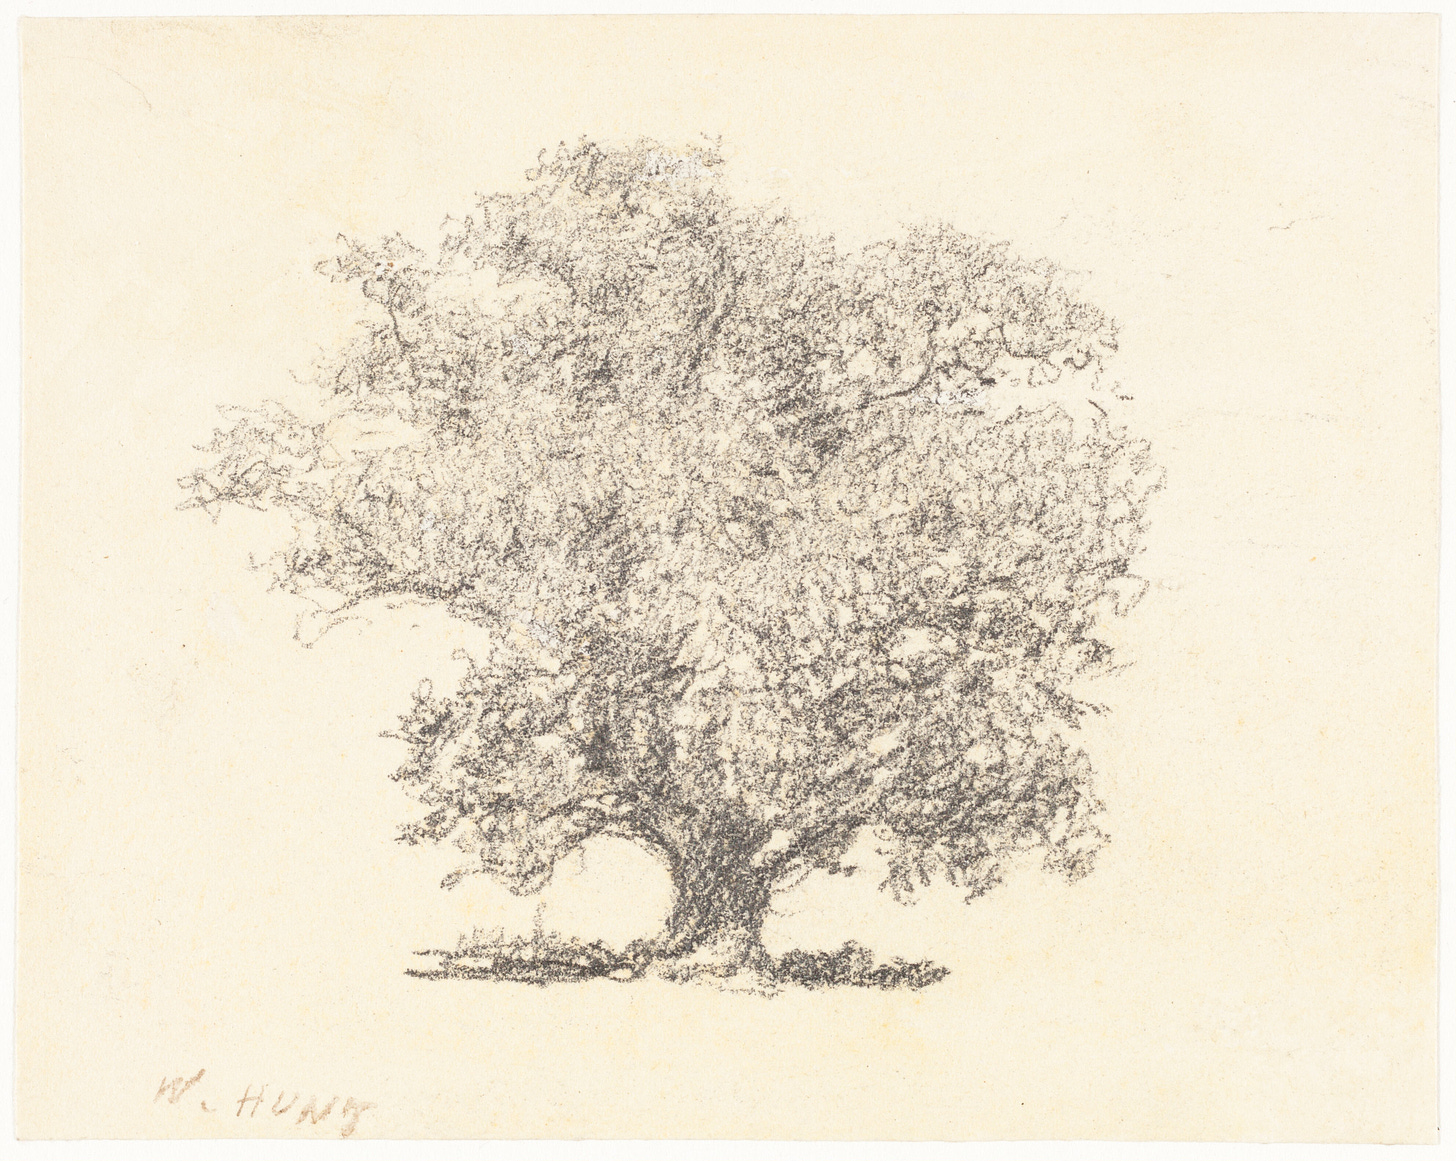 A tidy pencil drawing of a big tree with dense foliage.